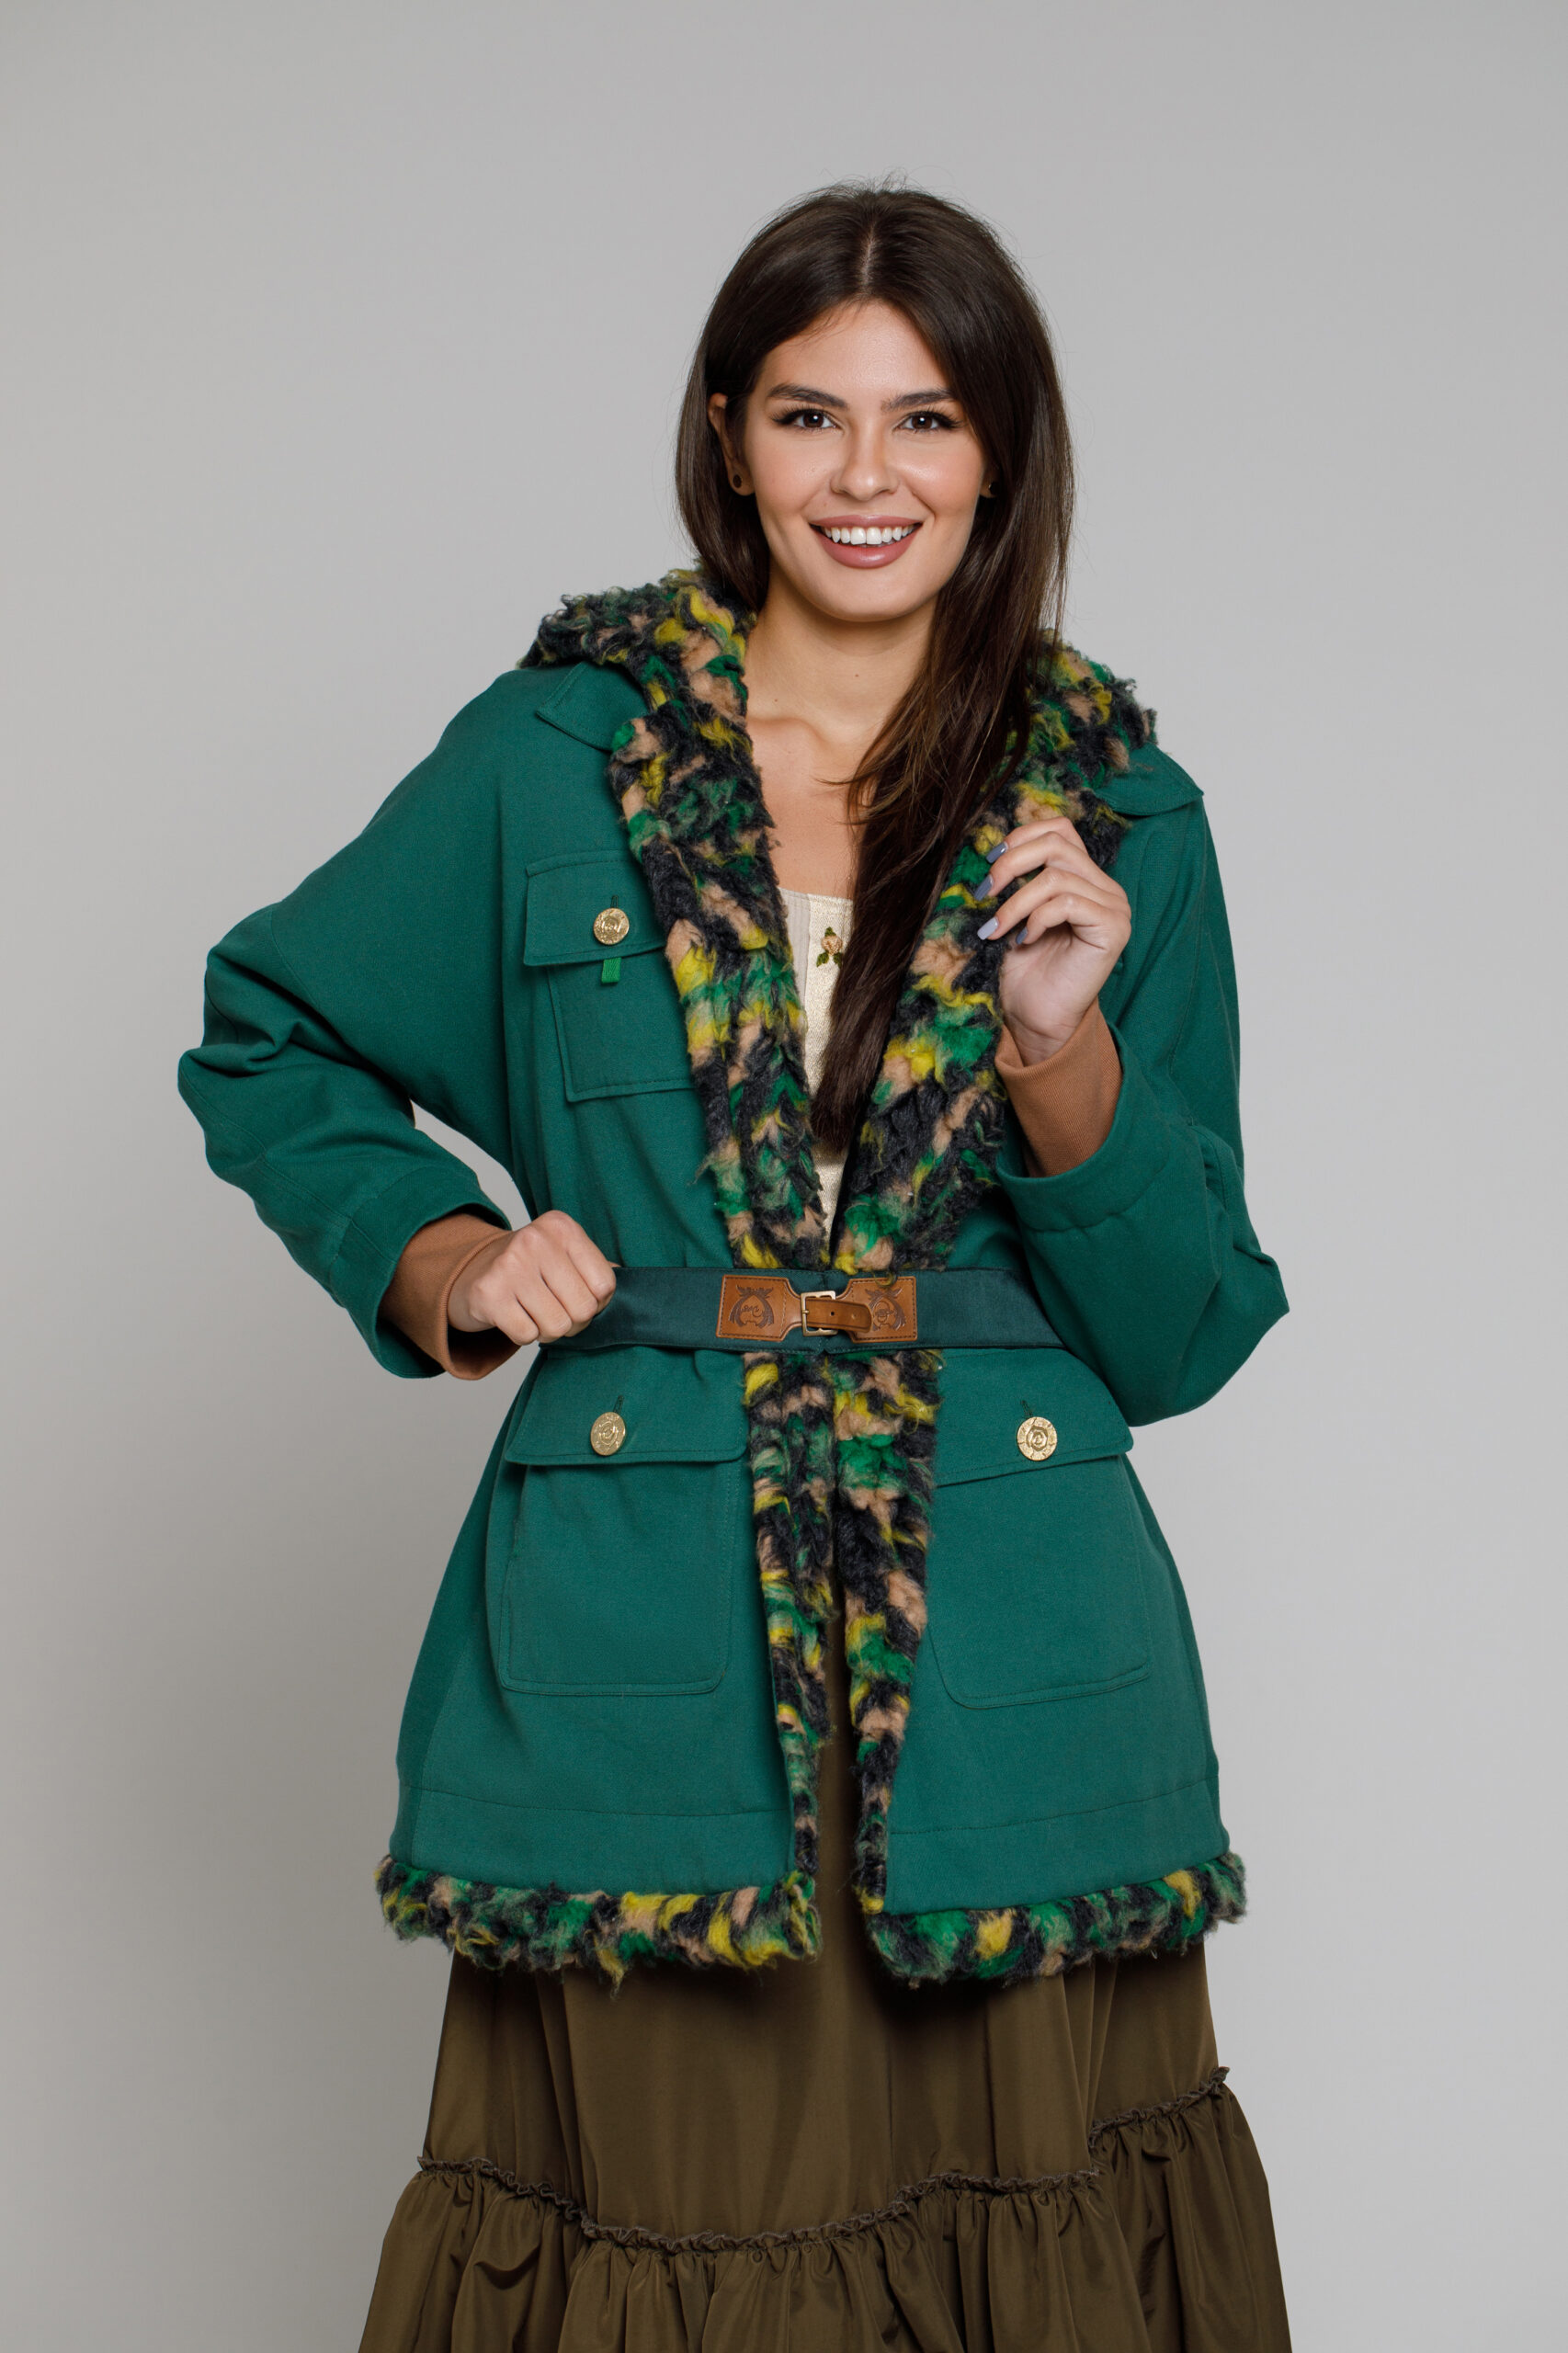 HEDONA jacket in green tercot with multicolored fur. Natural fabrics, original design, handmade embroidery